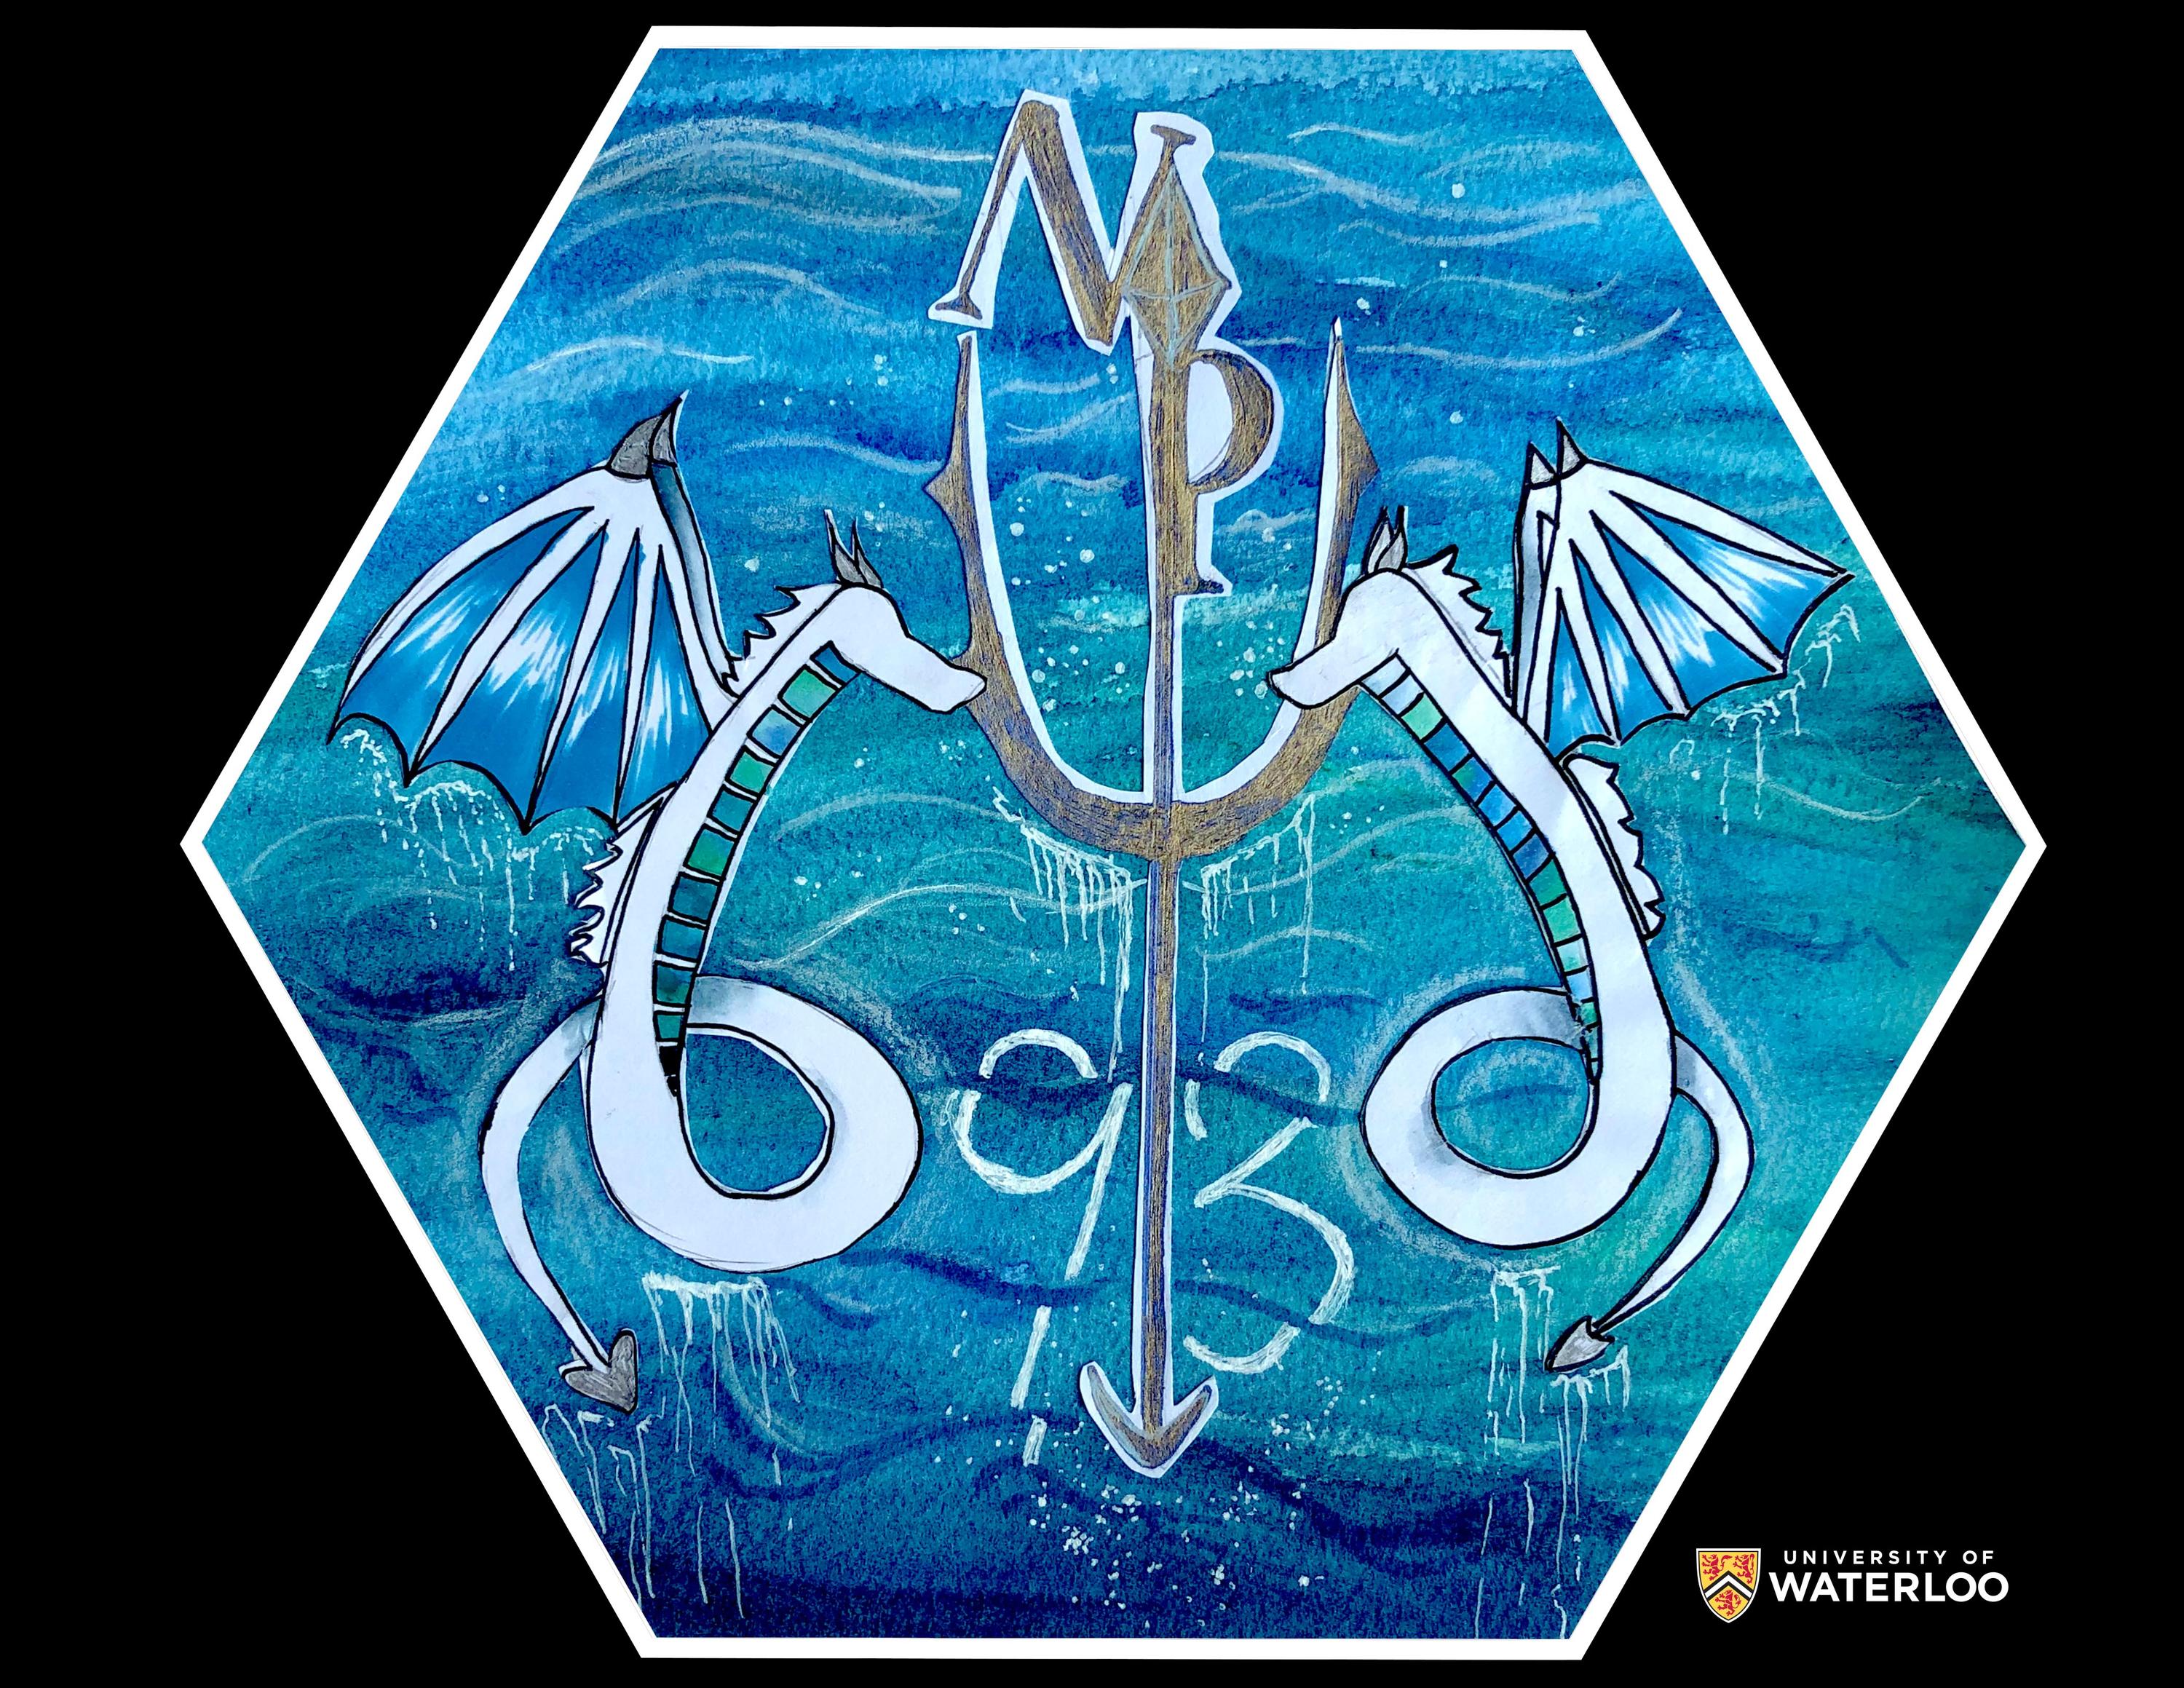 Pen and watercolor on blue background. The artwork shows an underwater scene. Centre is the chemical symbol “Np” appearing as part of a large trident. On each side are two mythical sea dragons. Below is “93”.